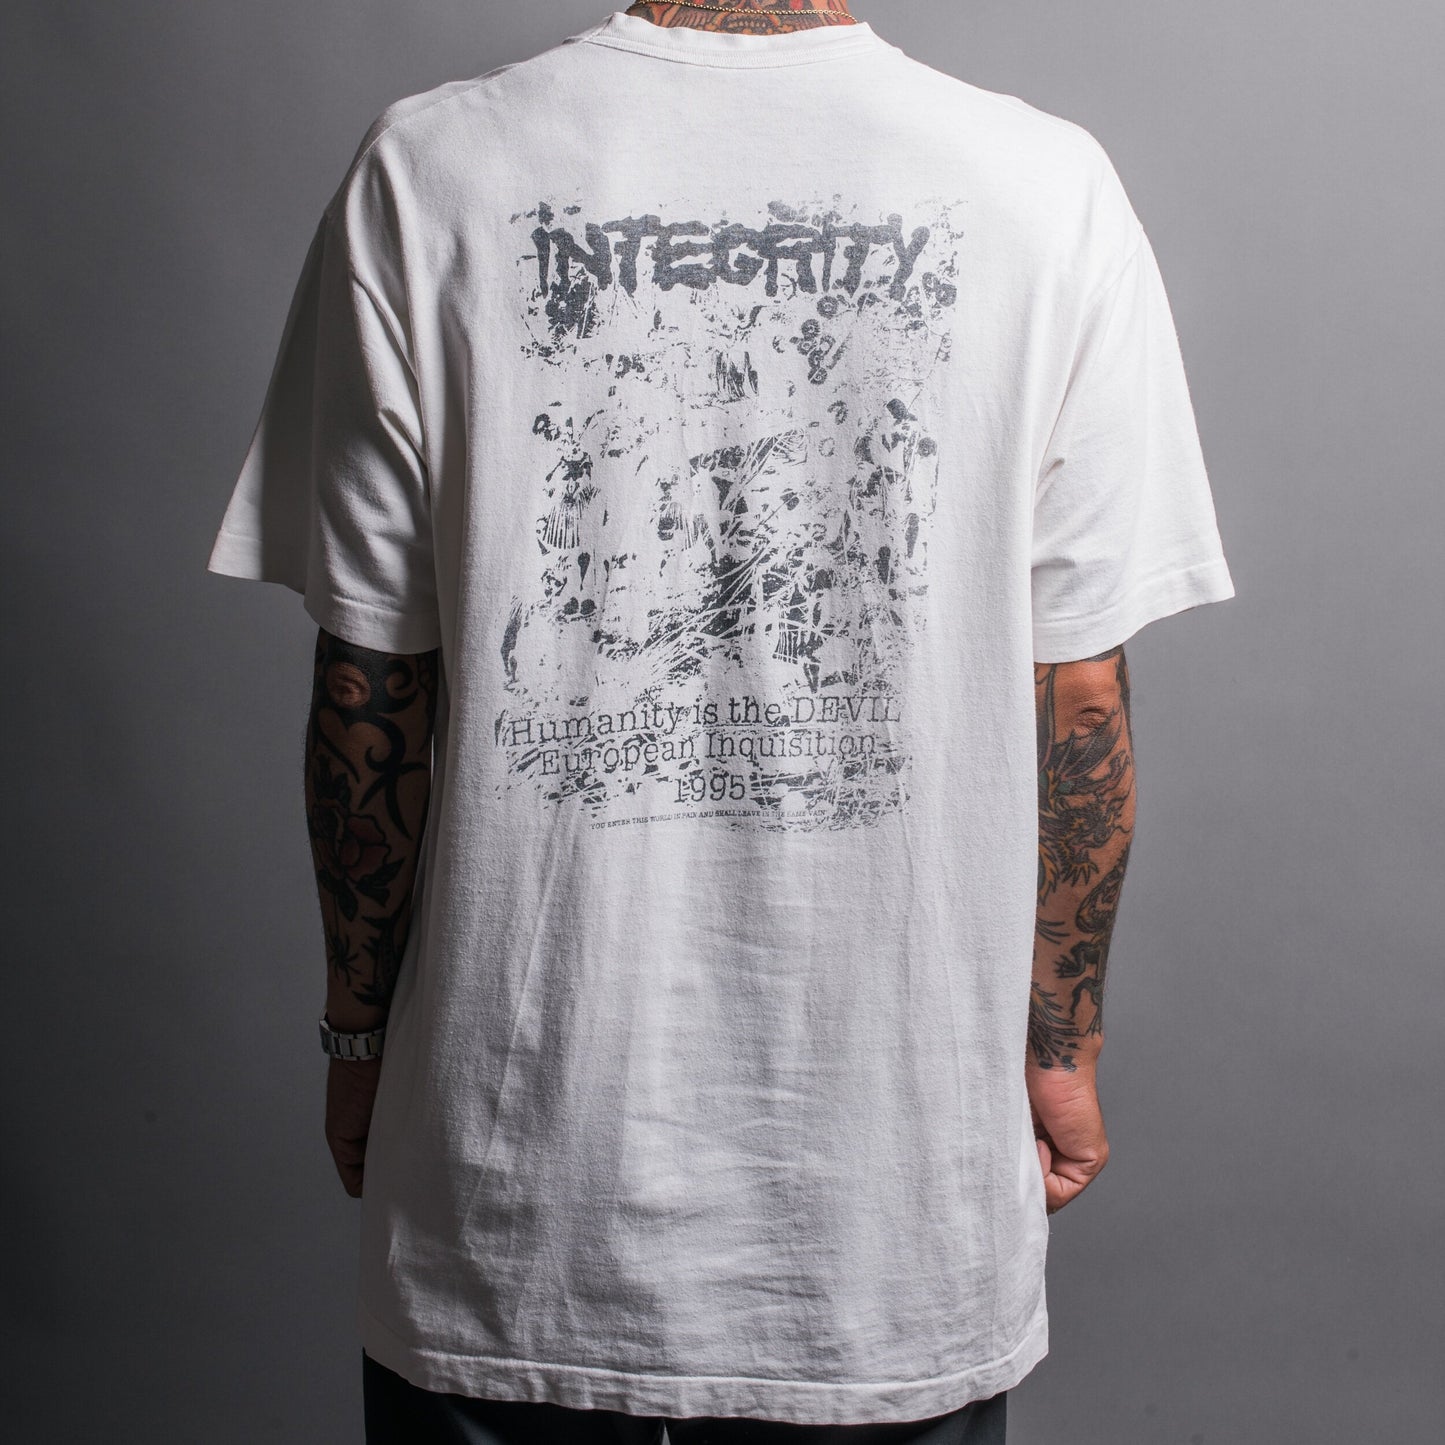 Vintage 1995 Integrity Humanity is the Devil European Inquisition T-Shirt